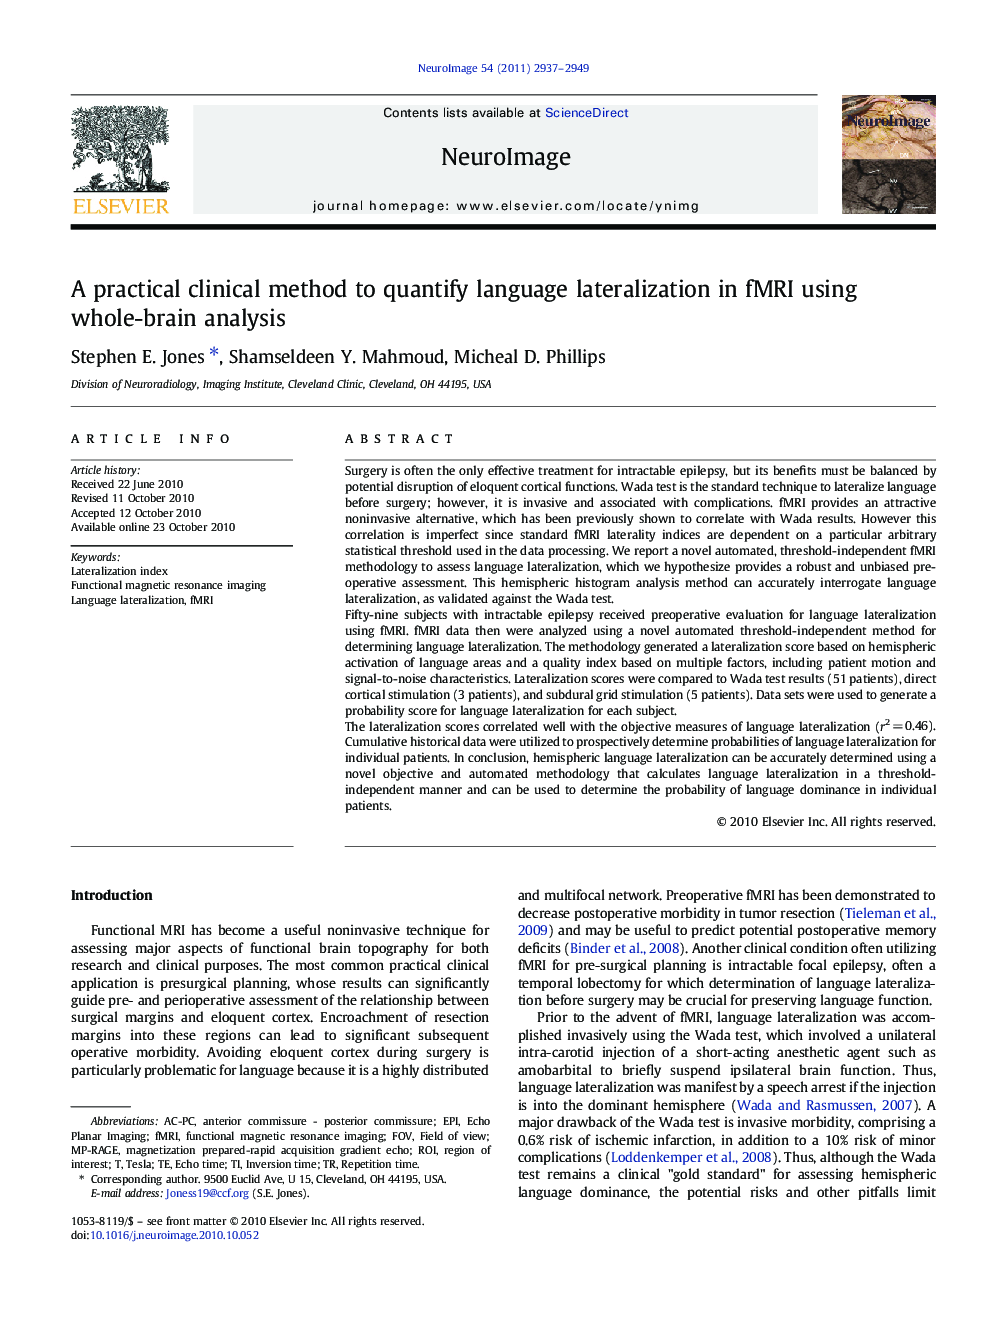 A practical clinical method to quantify language lateralization in fMRI using whole-brain analysis